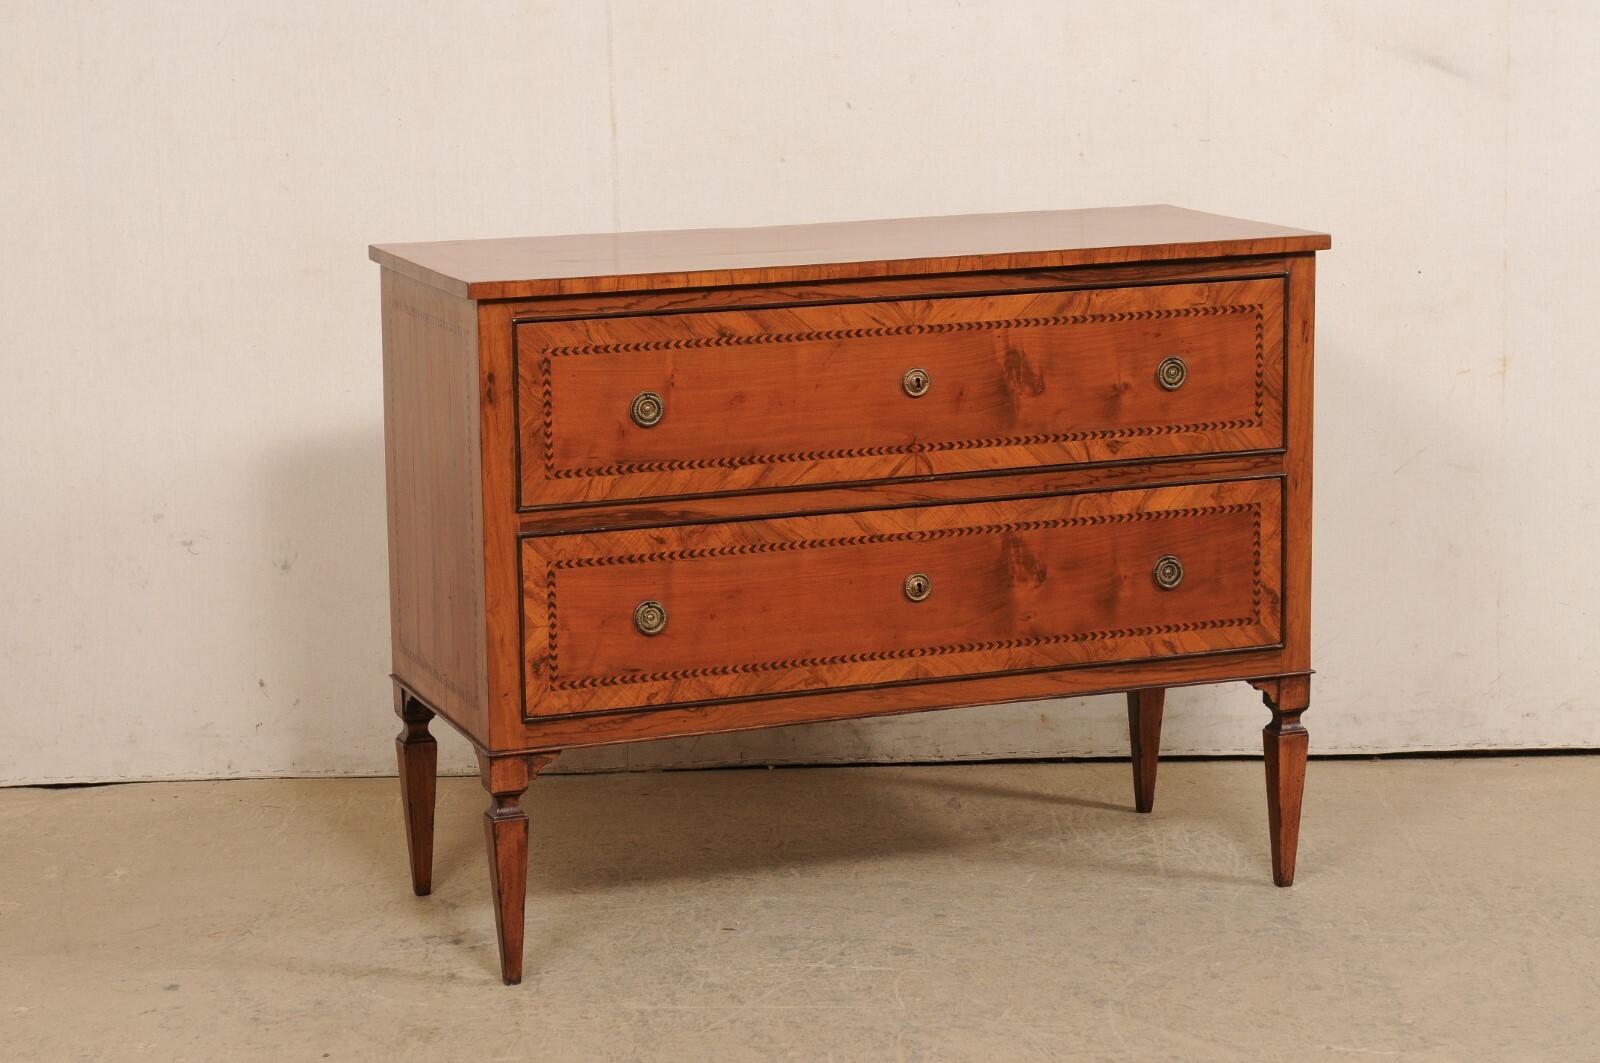 An Italian two-drawer chest with inlay accents from the 19th century. This beautiful antique fruitwood chest from Italy features delicate inlay banding that outlines the perimeter about the top, drawer fronts, and each side. The rectangular-shaped